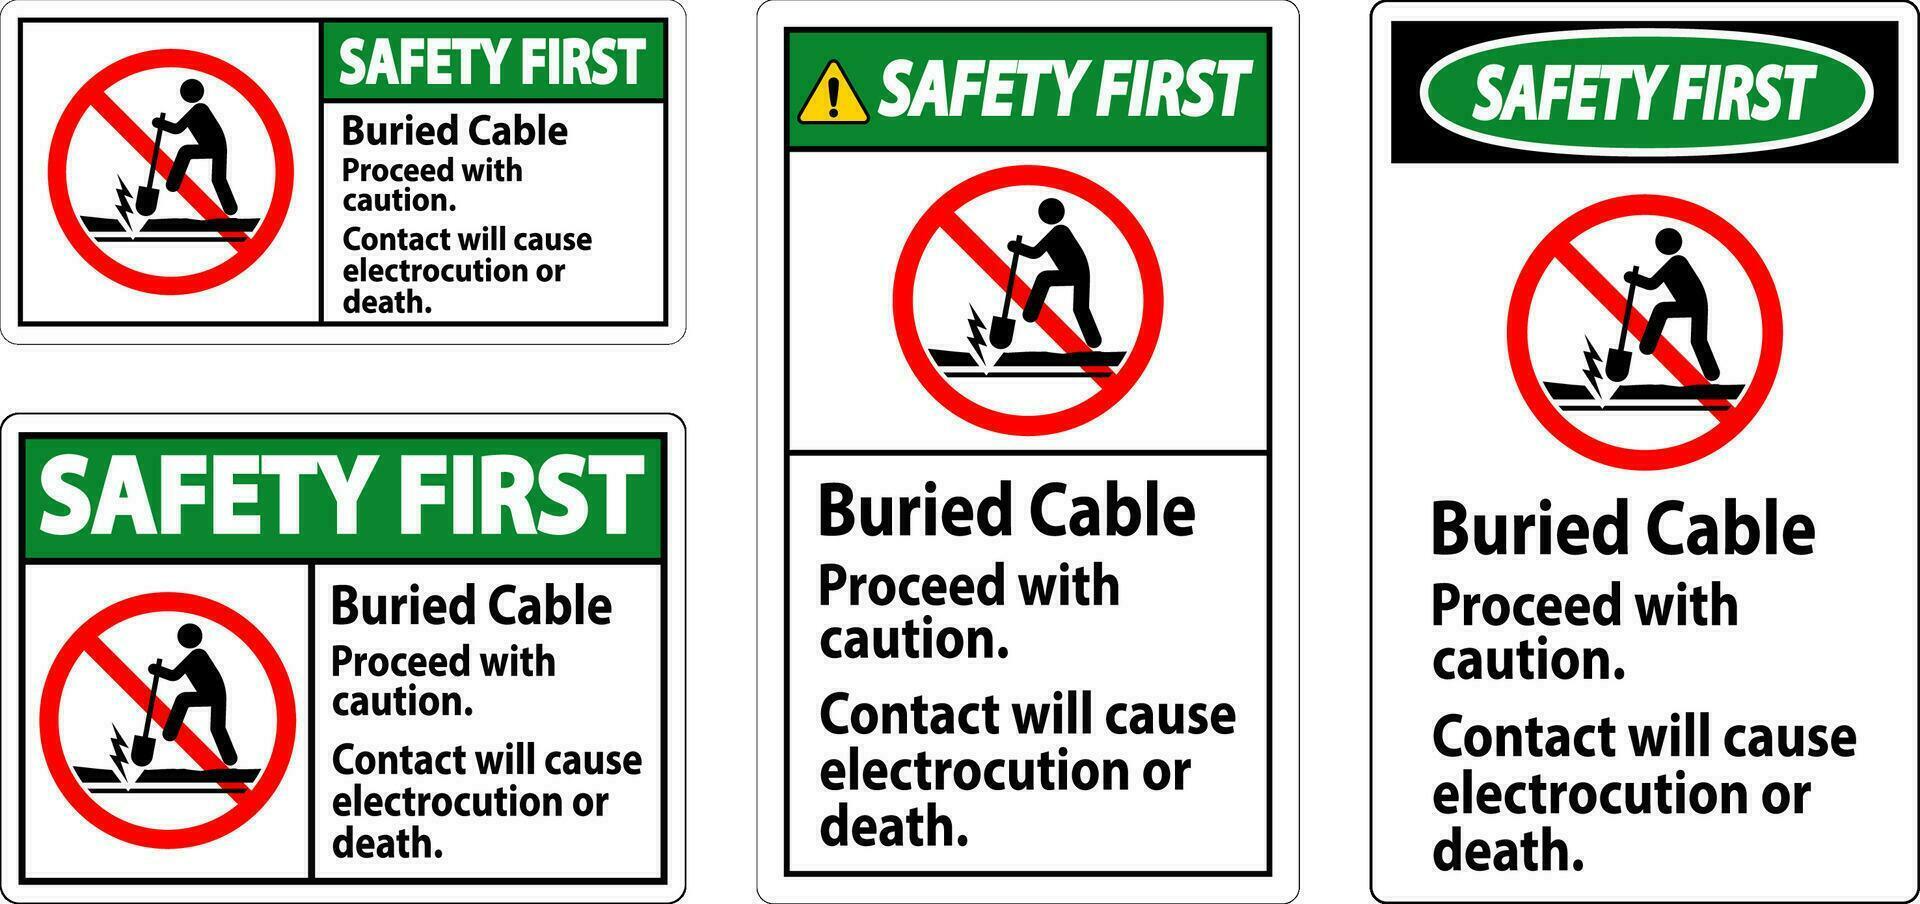 Safety First Sign Buried Cable, Proceed With Caution, Contact Will Cause Electrocution Or Death vector